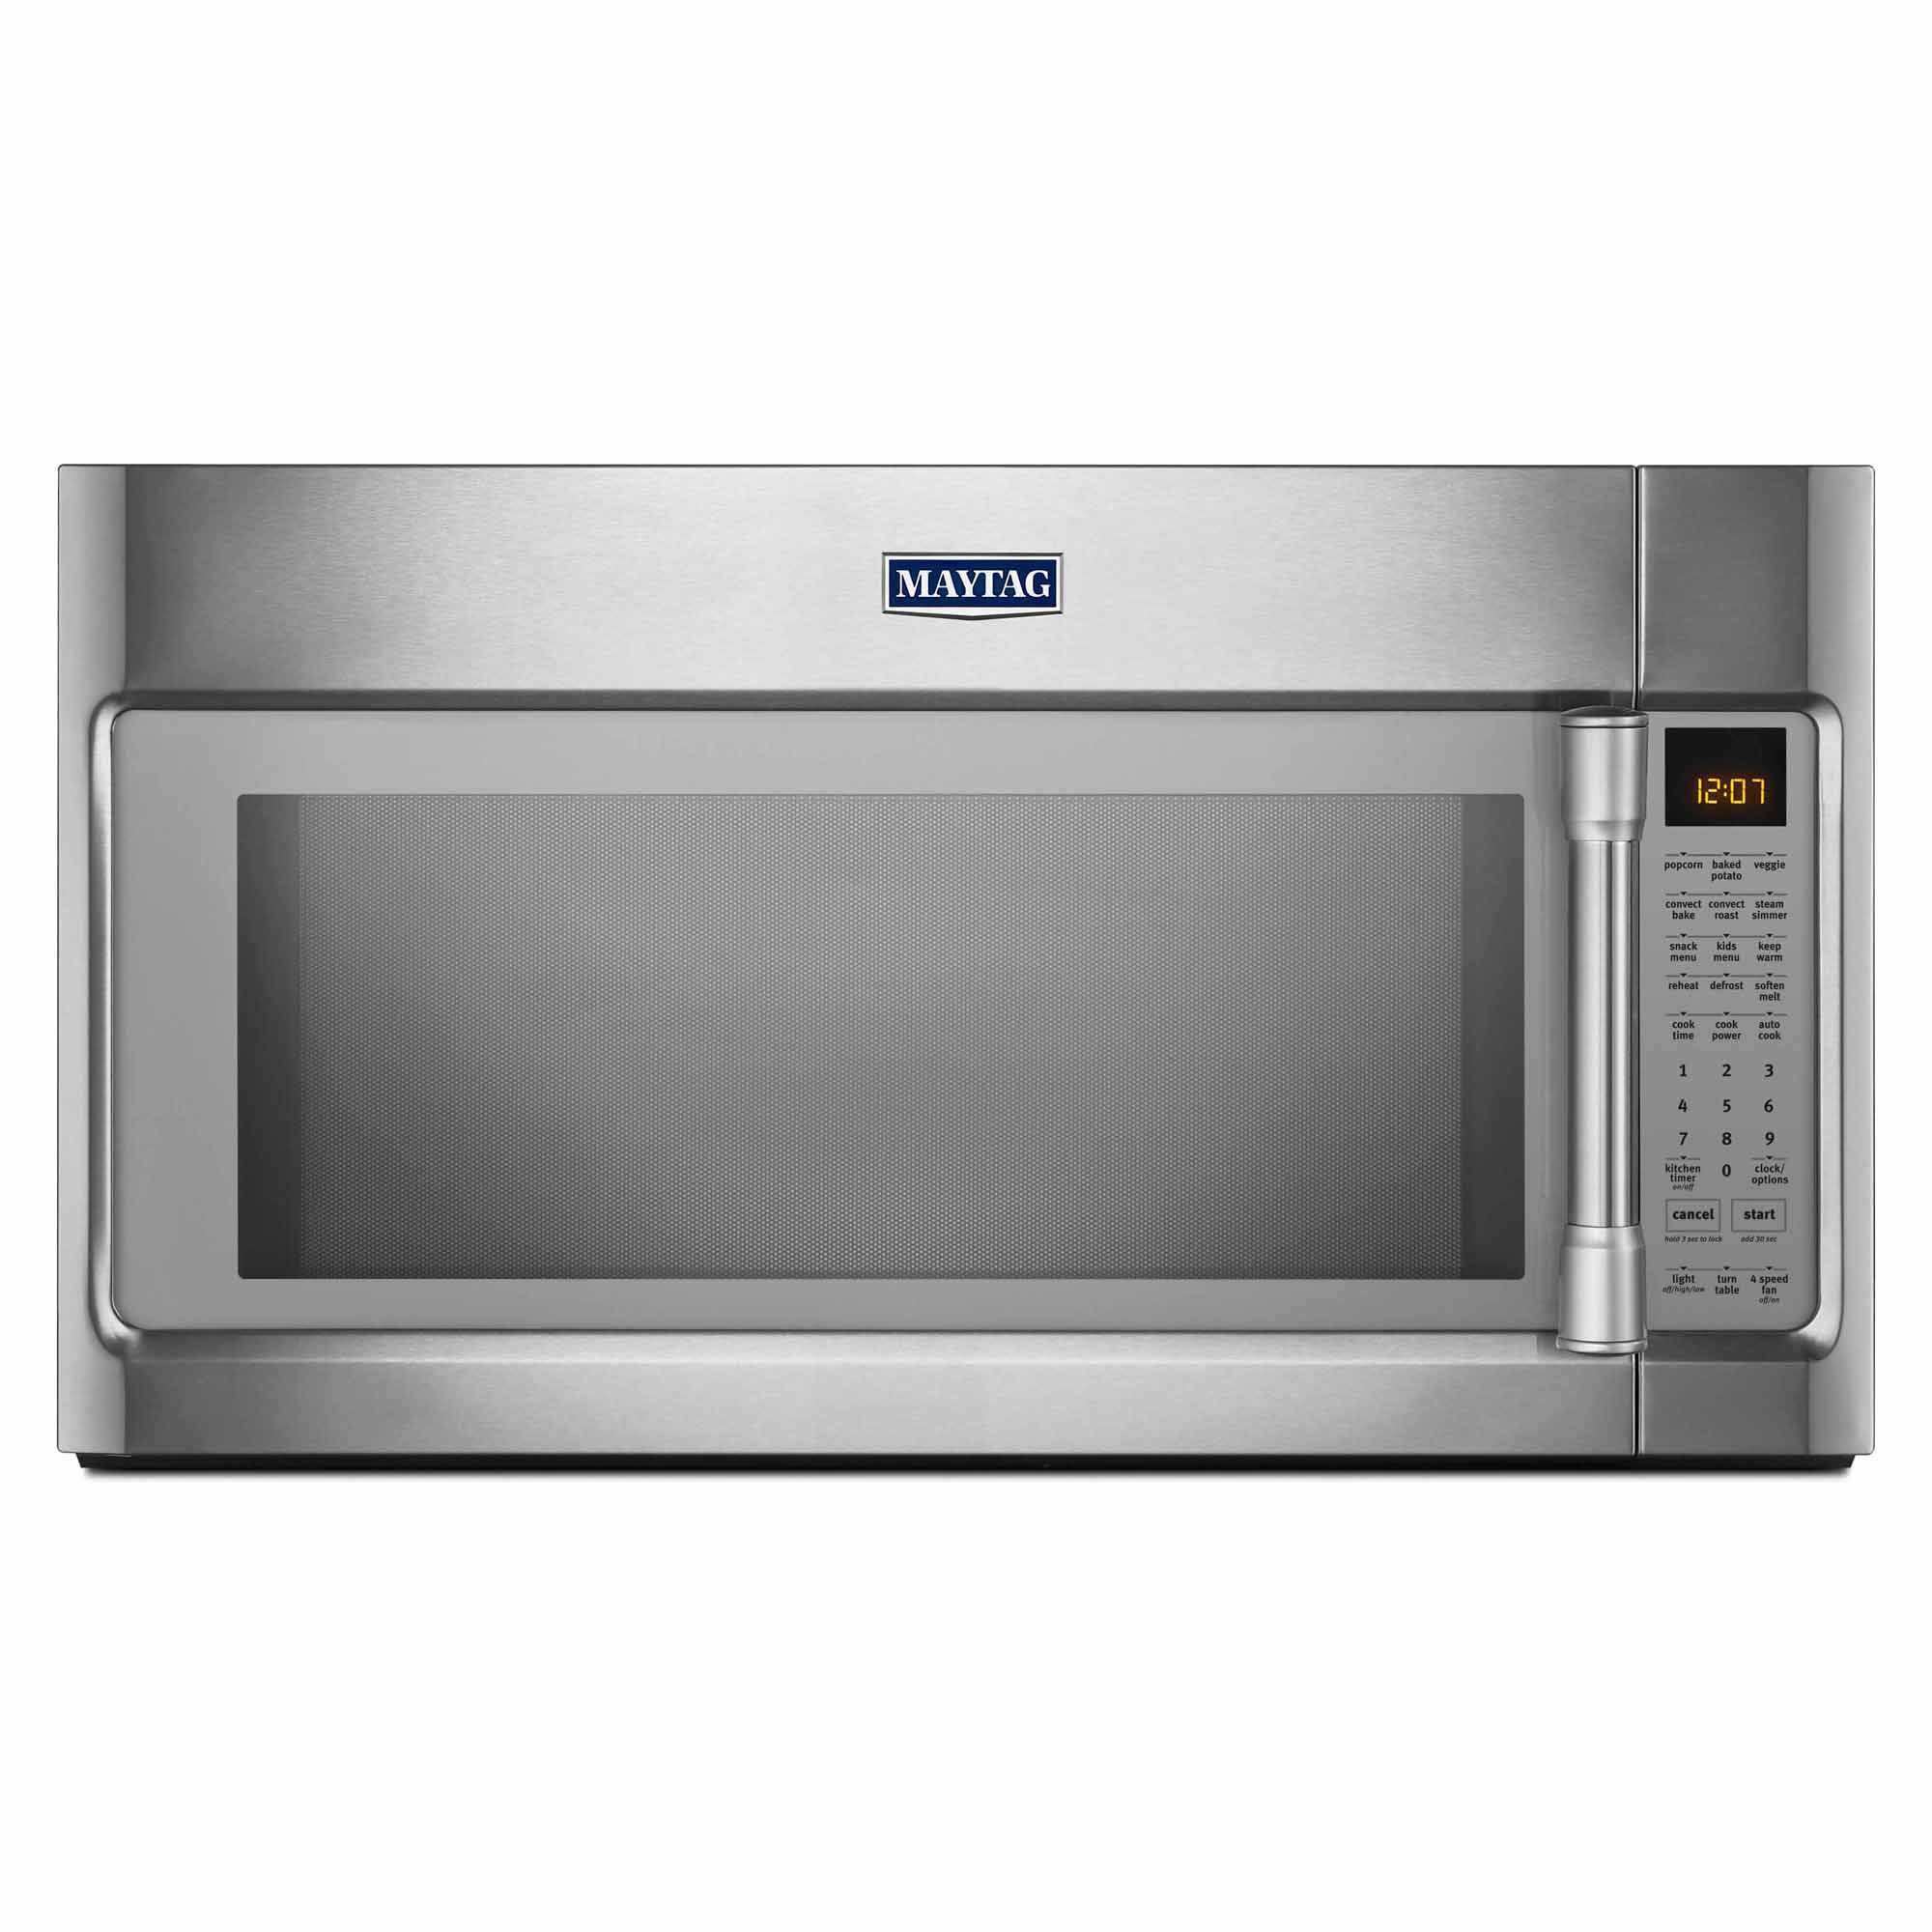 Maytag MMV6190DS 1.9 cu. ft. Microwave Hood Combination w/ EvenAir Convection Stainless Steel